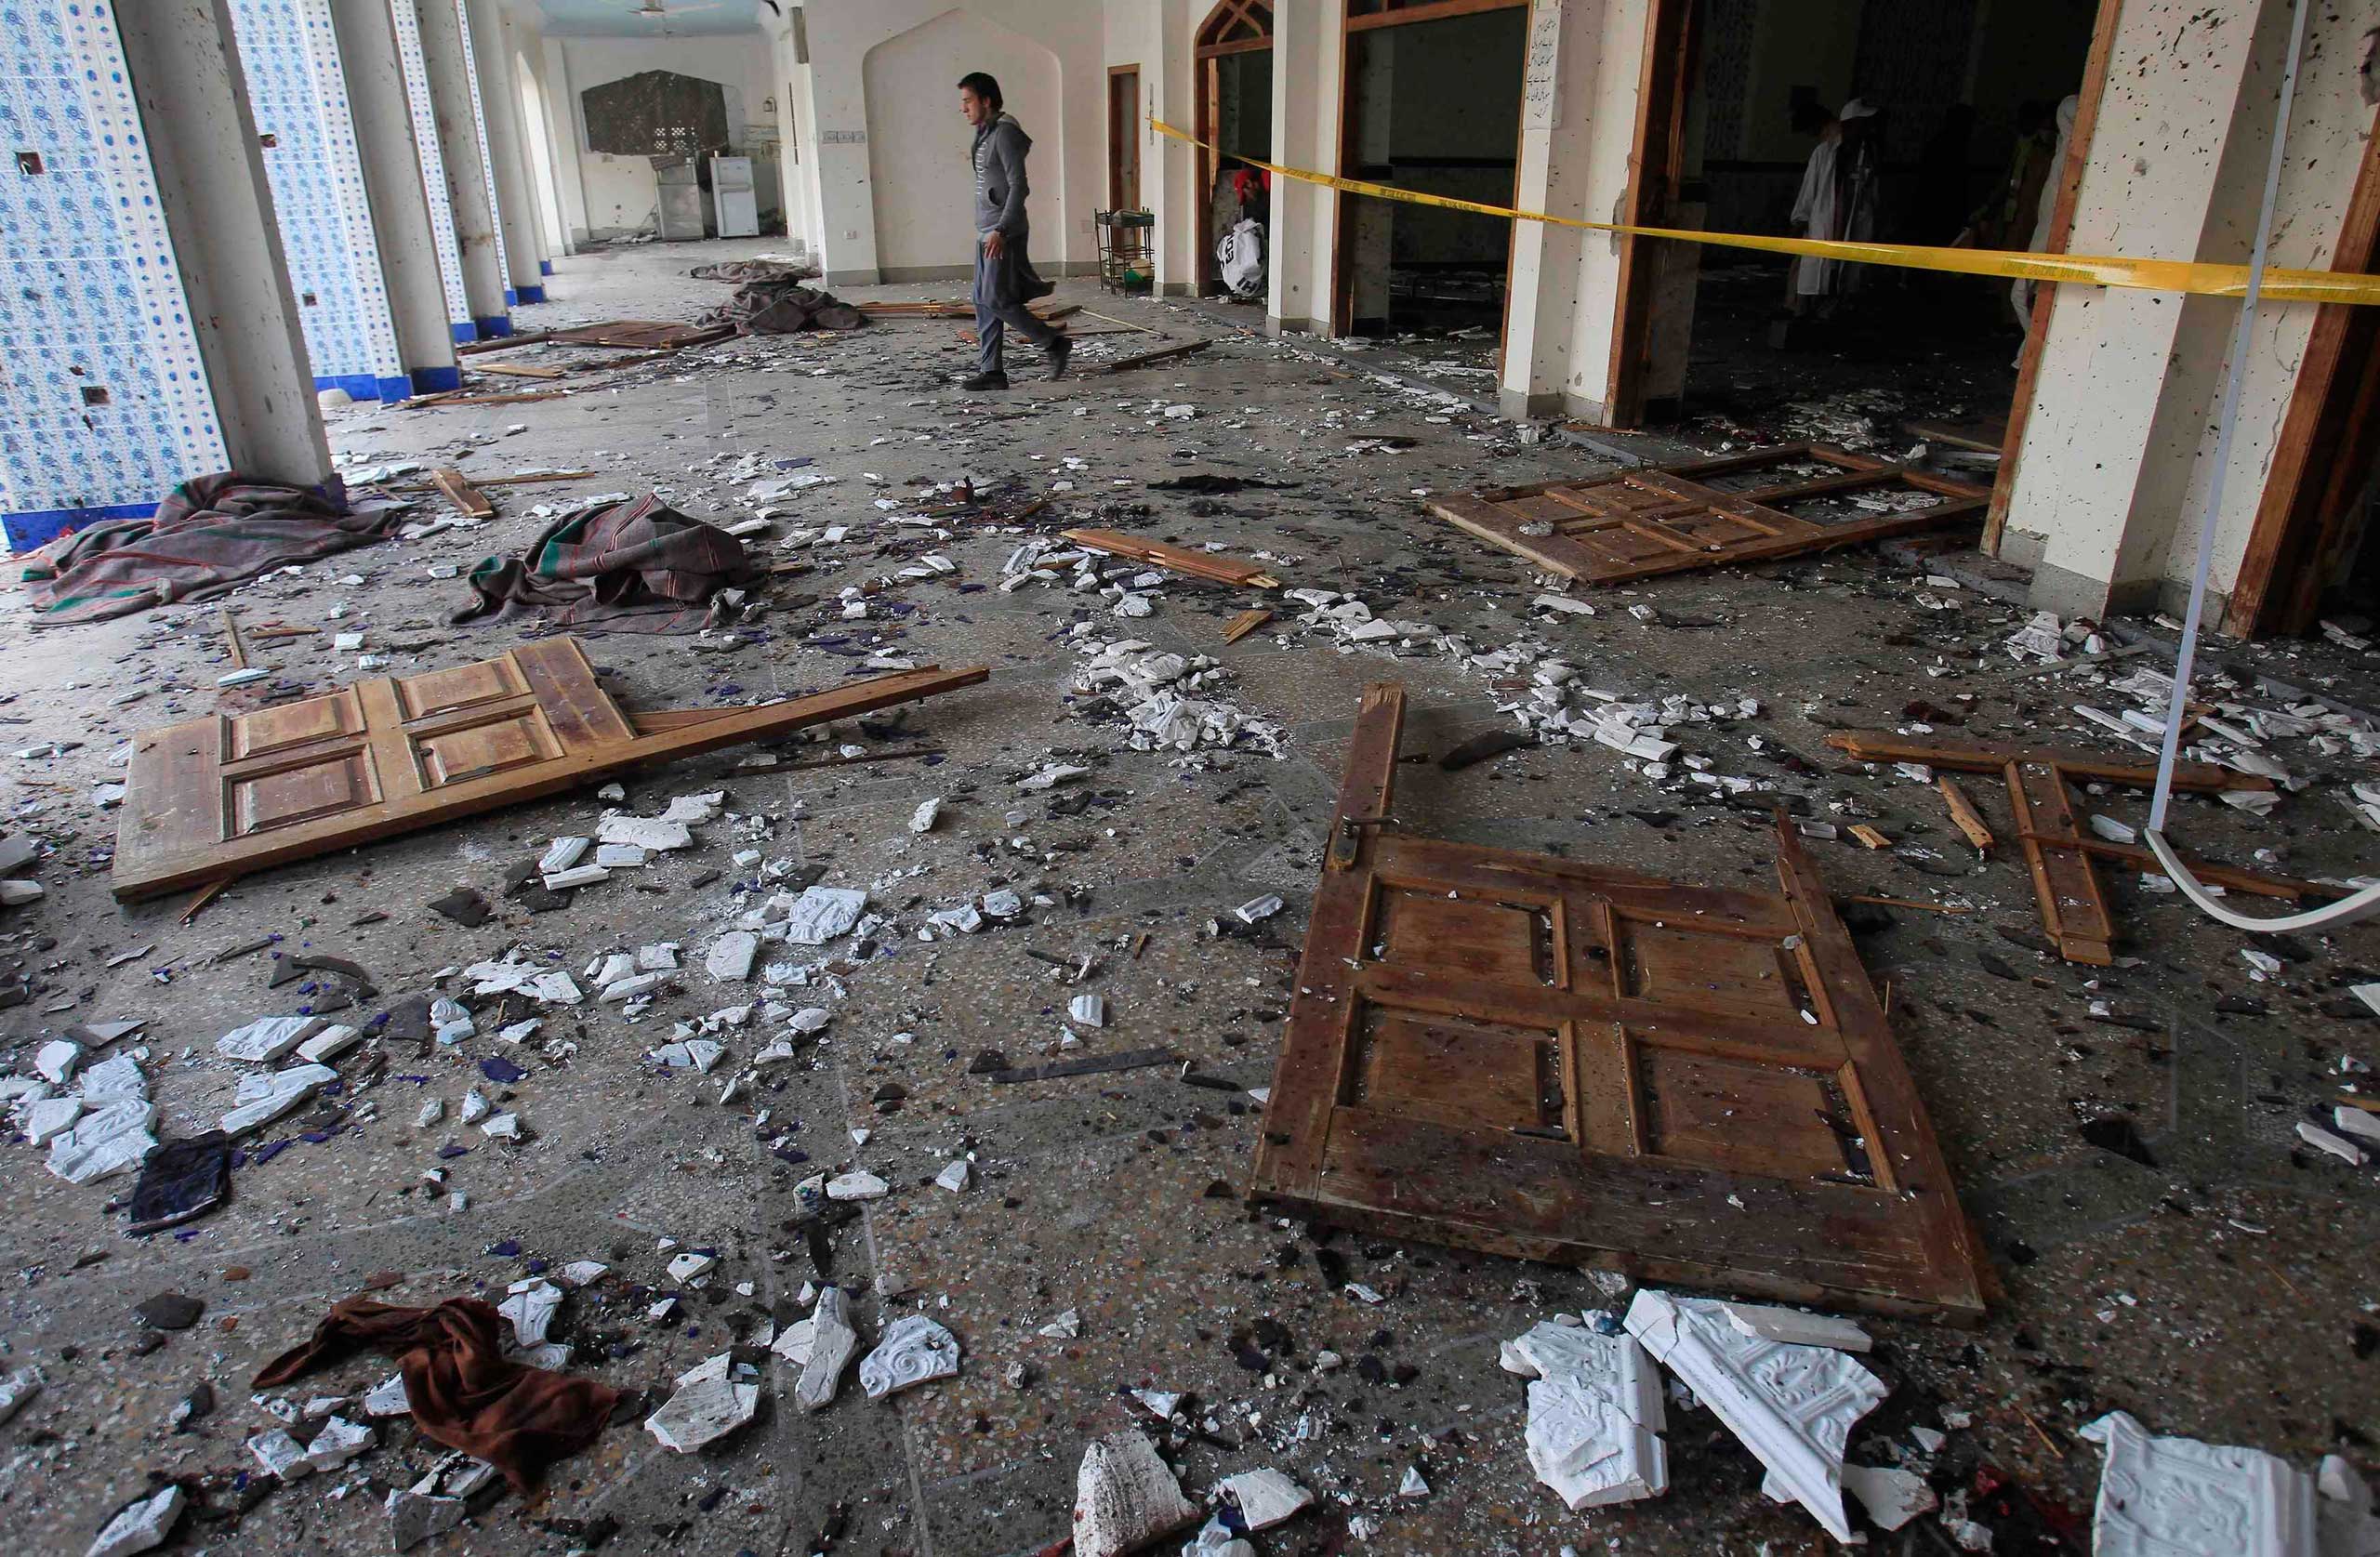 A man walks past broken glass and doors after an explosion in a Shi'ite mosque in Peshawar Feb. 13, 2015.